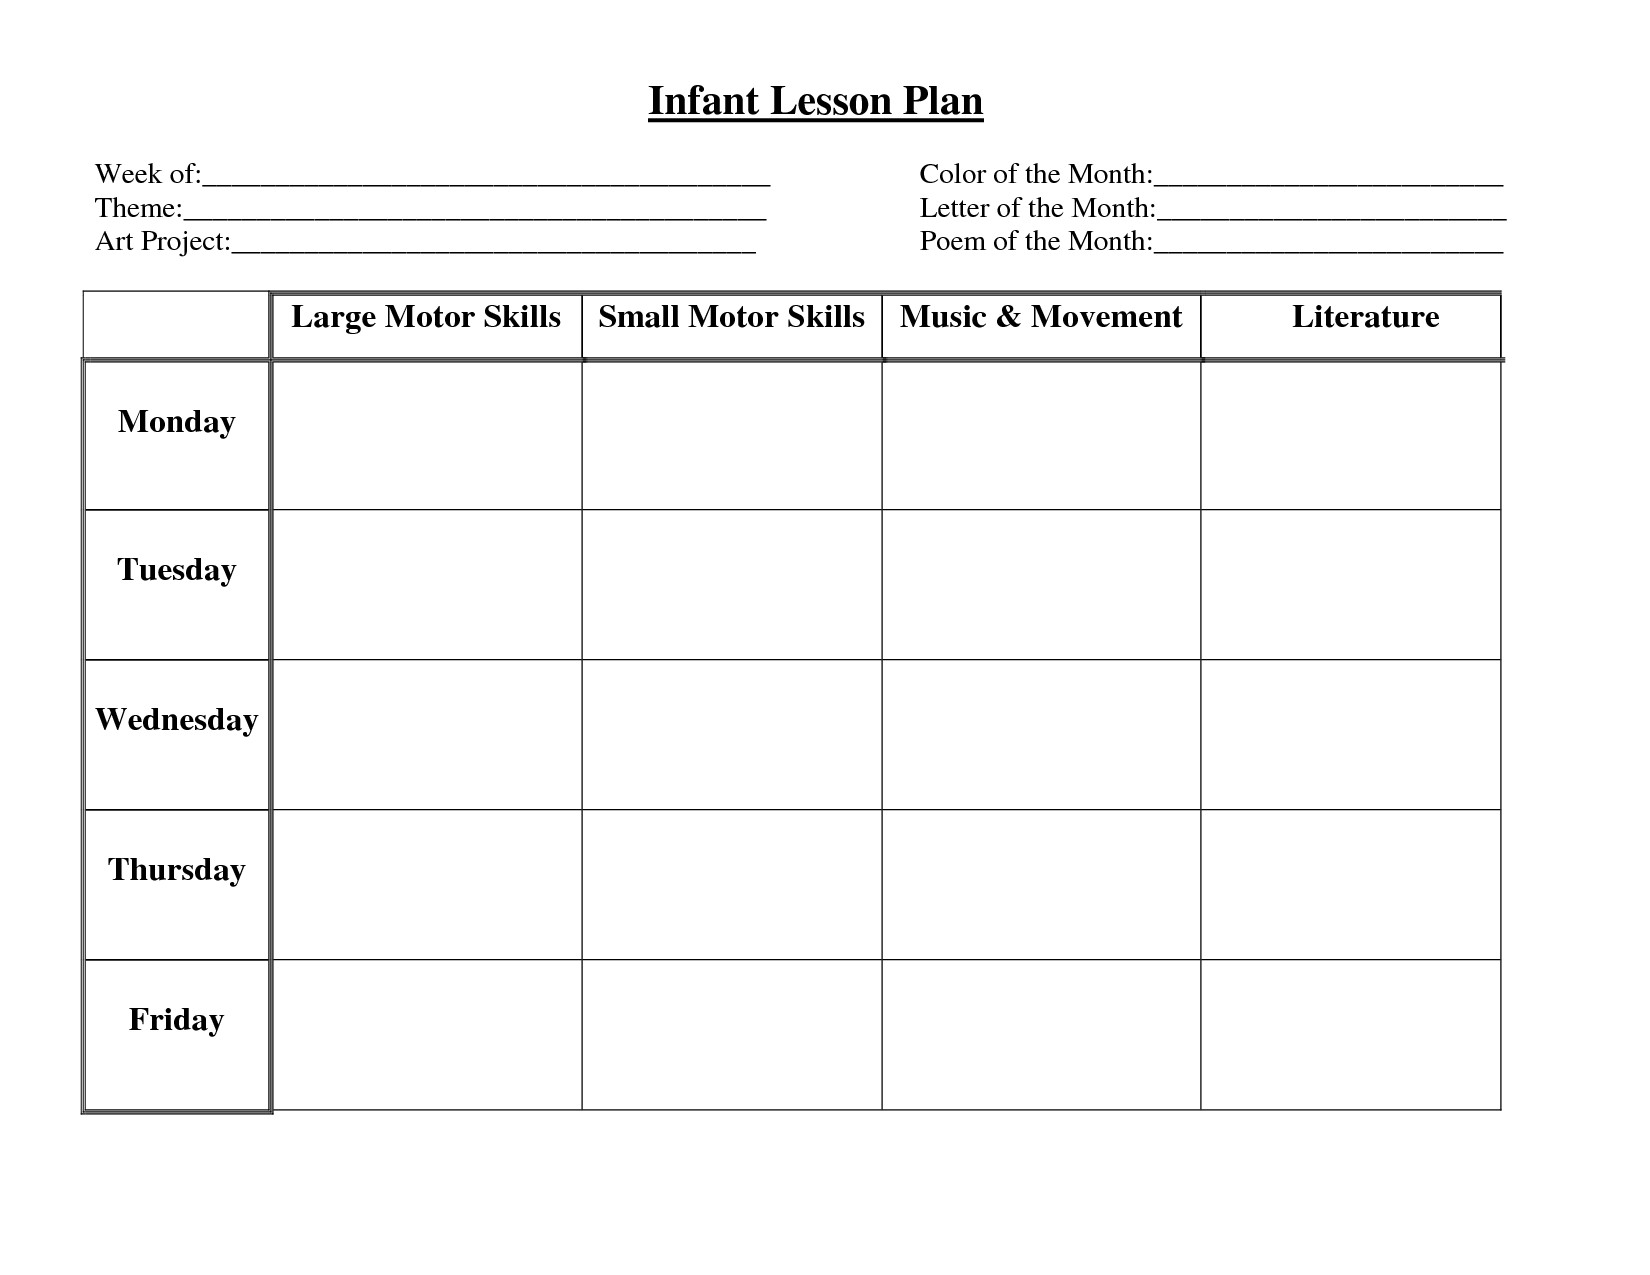 Monthly Lesson Plan Template Infant Blank Lesson Plan Sheets